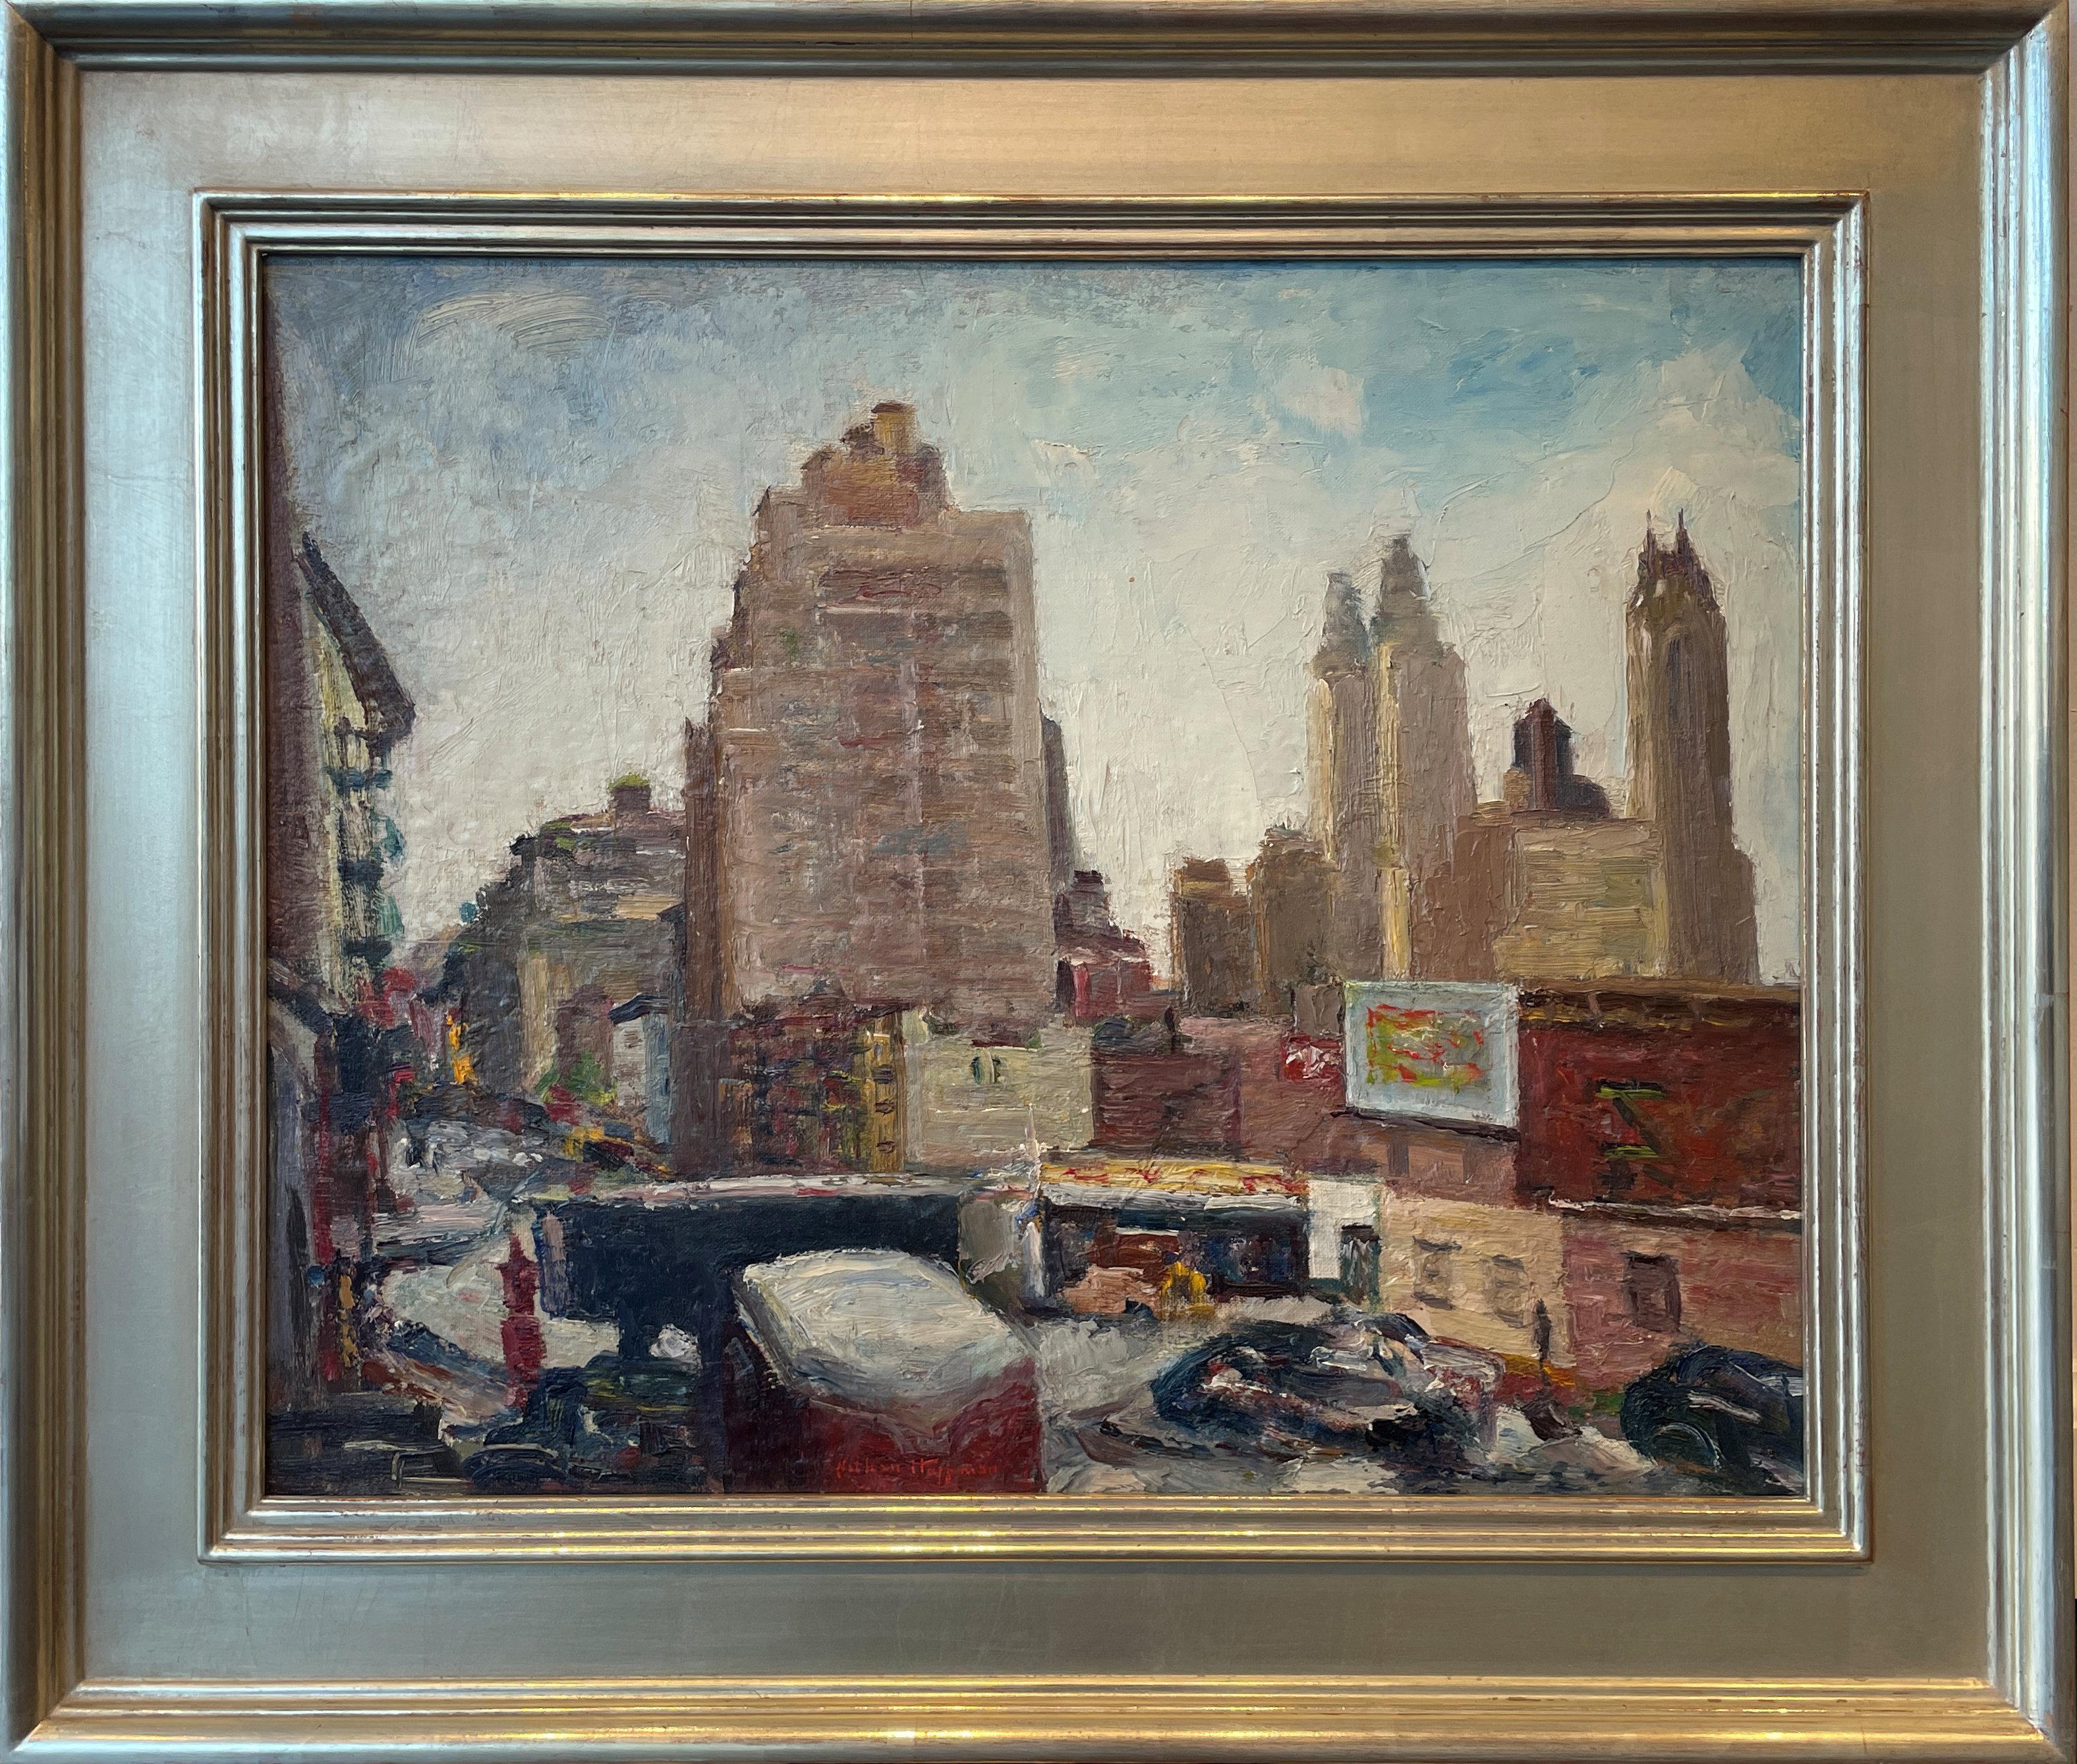 Nathan Hoffman
Manhattan from the Rooftops, July 1, 1947
Signed, dated and estate stamped on the reverse
Oil on board
15 3/4 x 20 inches

Born in Russia, the son of Friede (1878 – 1956) and Benjamin Hoffman (1878 – a. 1942). Benjamin was a dealer in